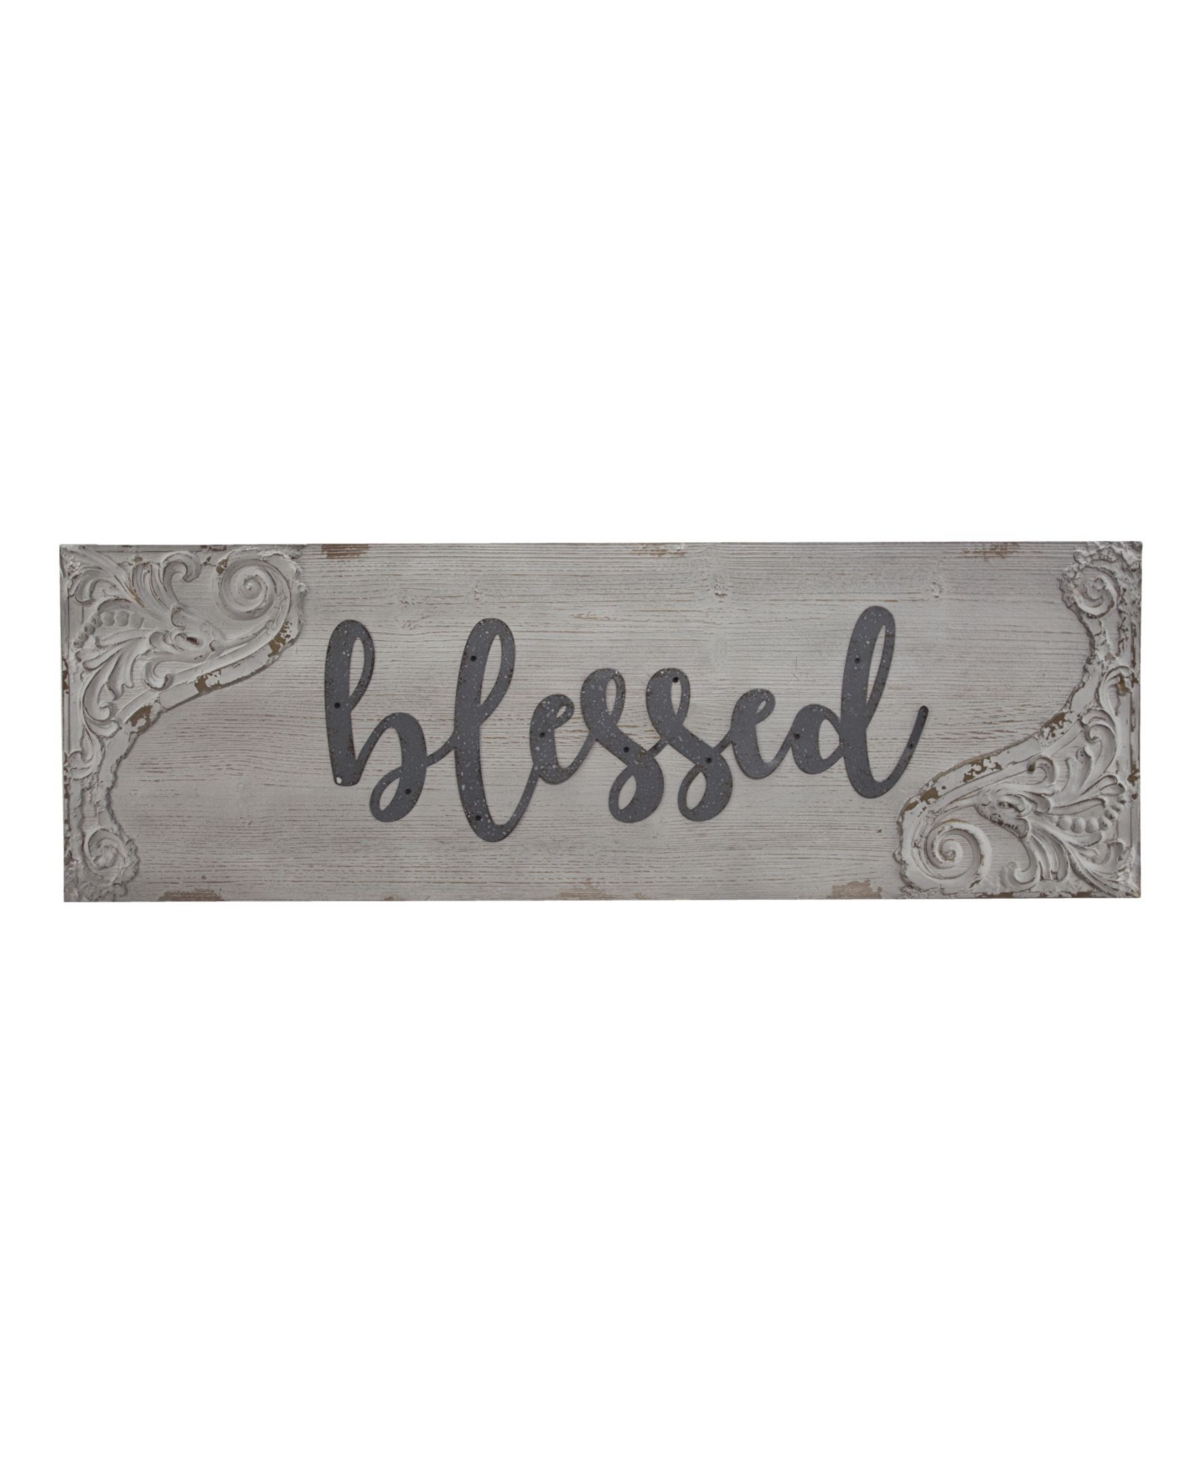 Crystal Art Gallery American Art Decor Vintage-like Wood Blessed Sign In Gray